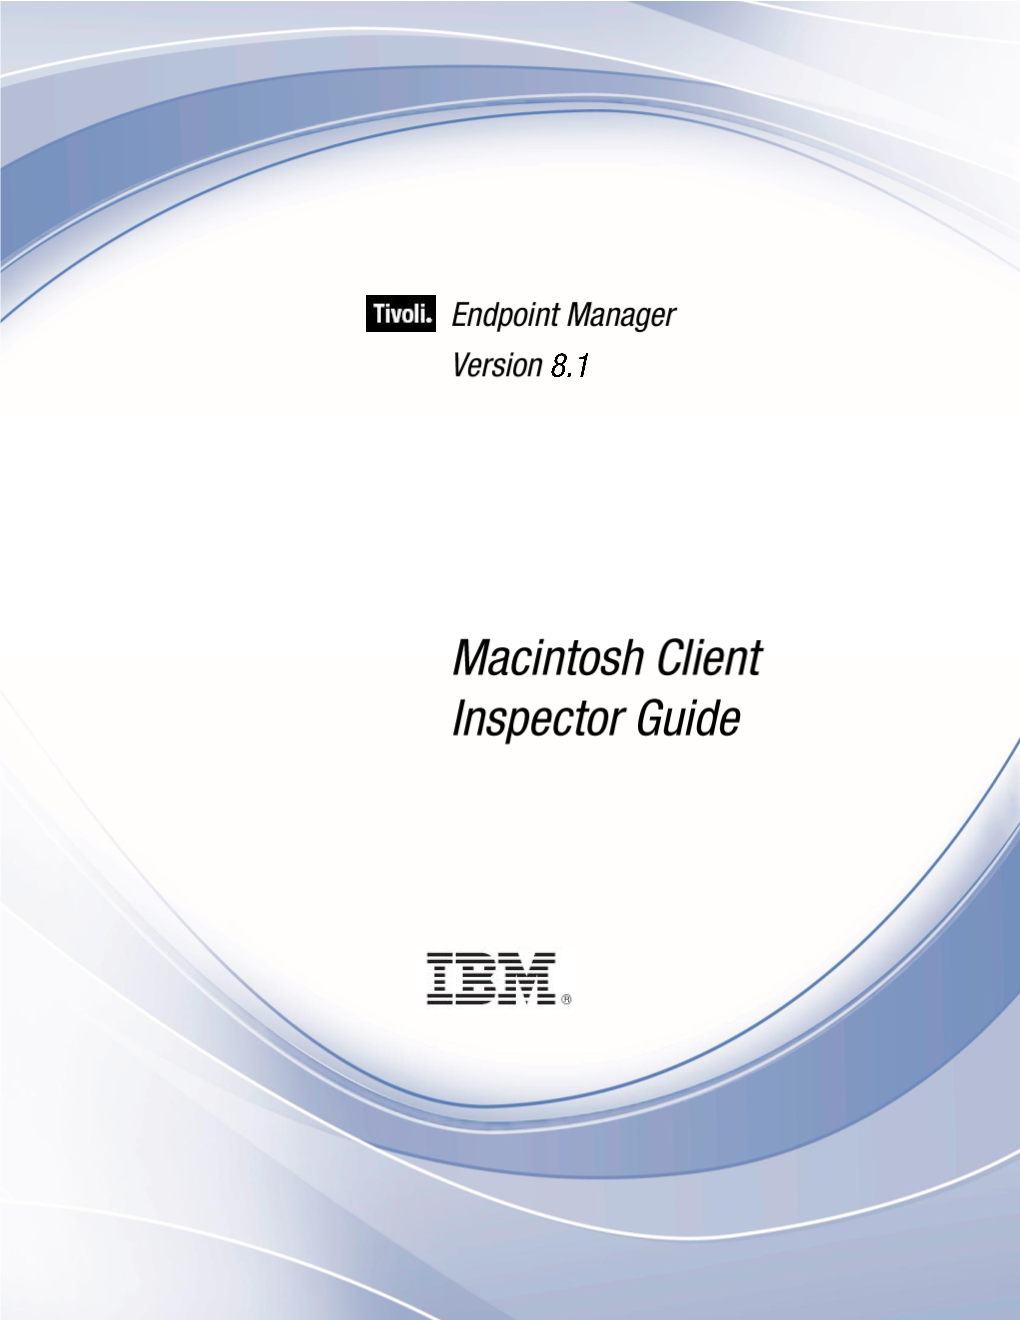 Tivoli Endpoint Manager Macintosh Inspector Guide